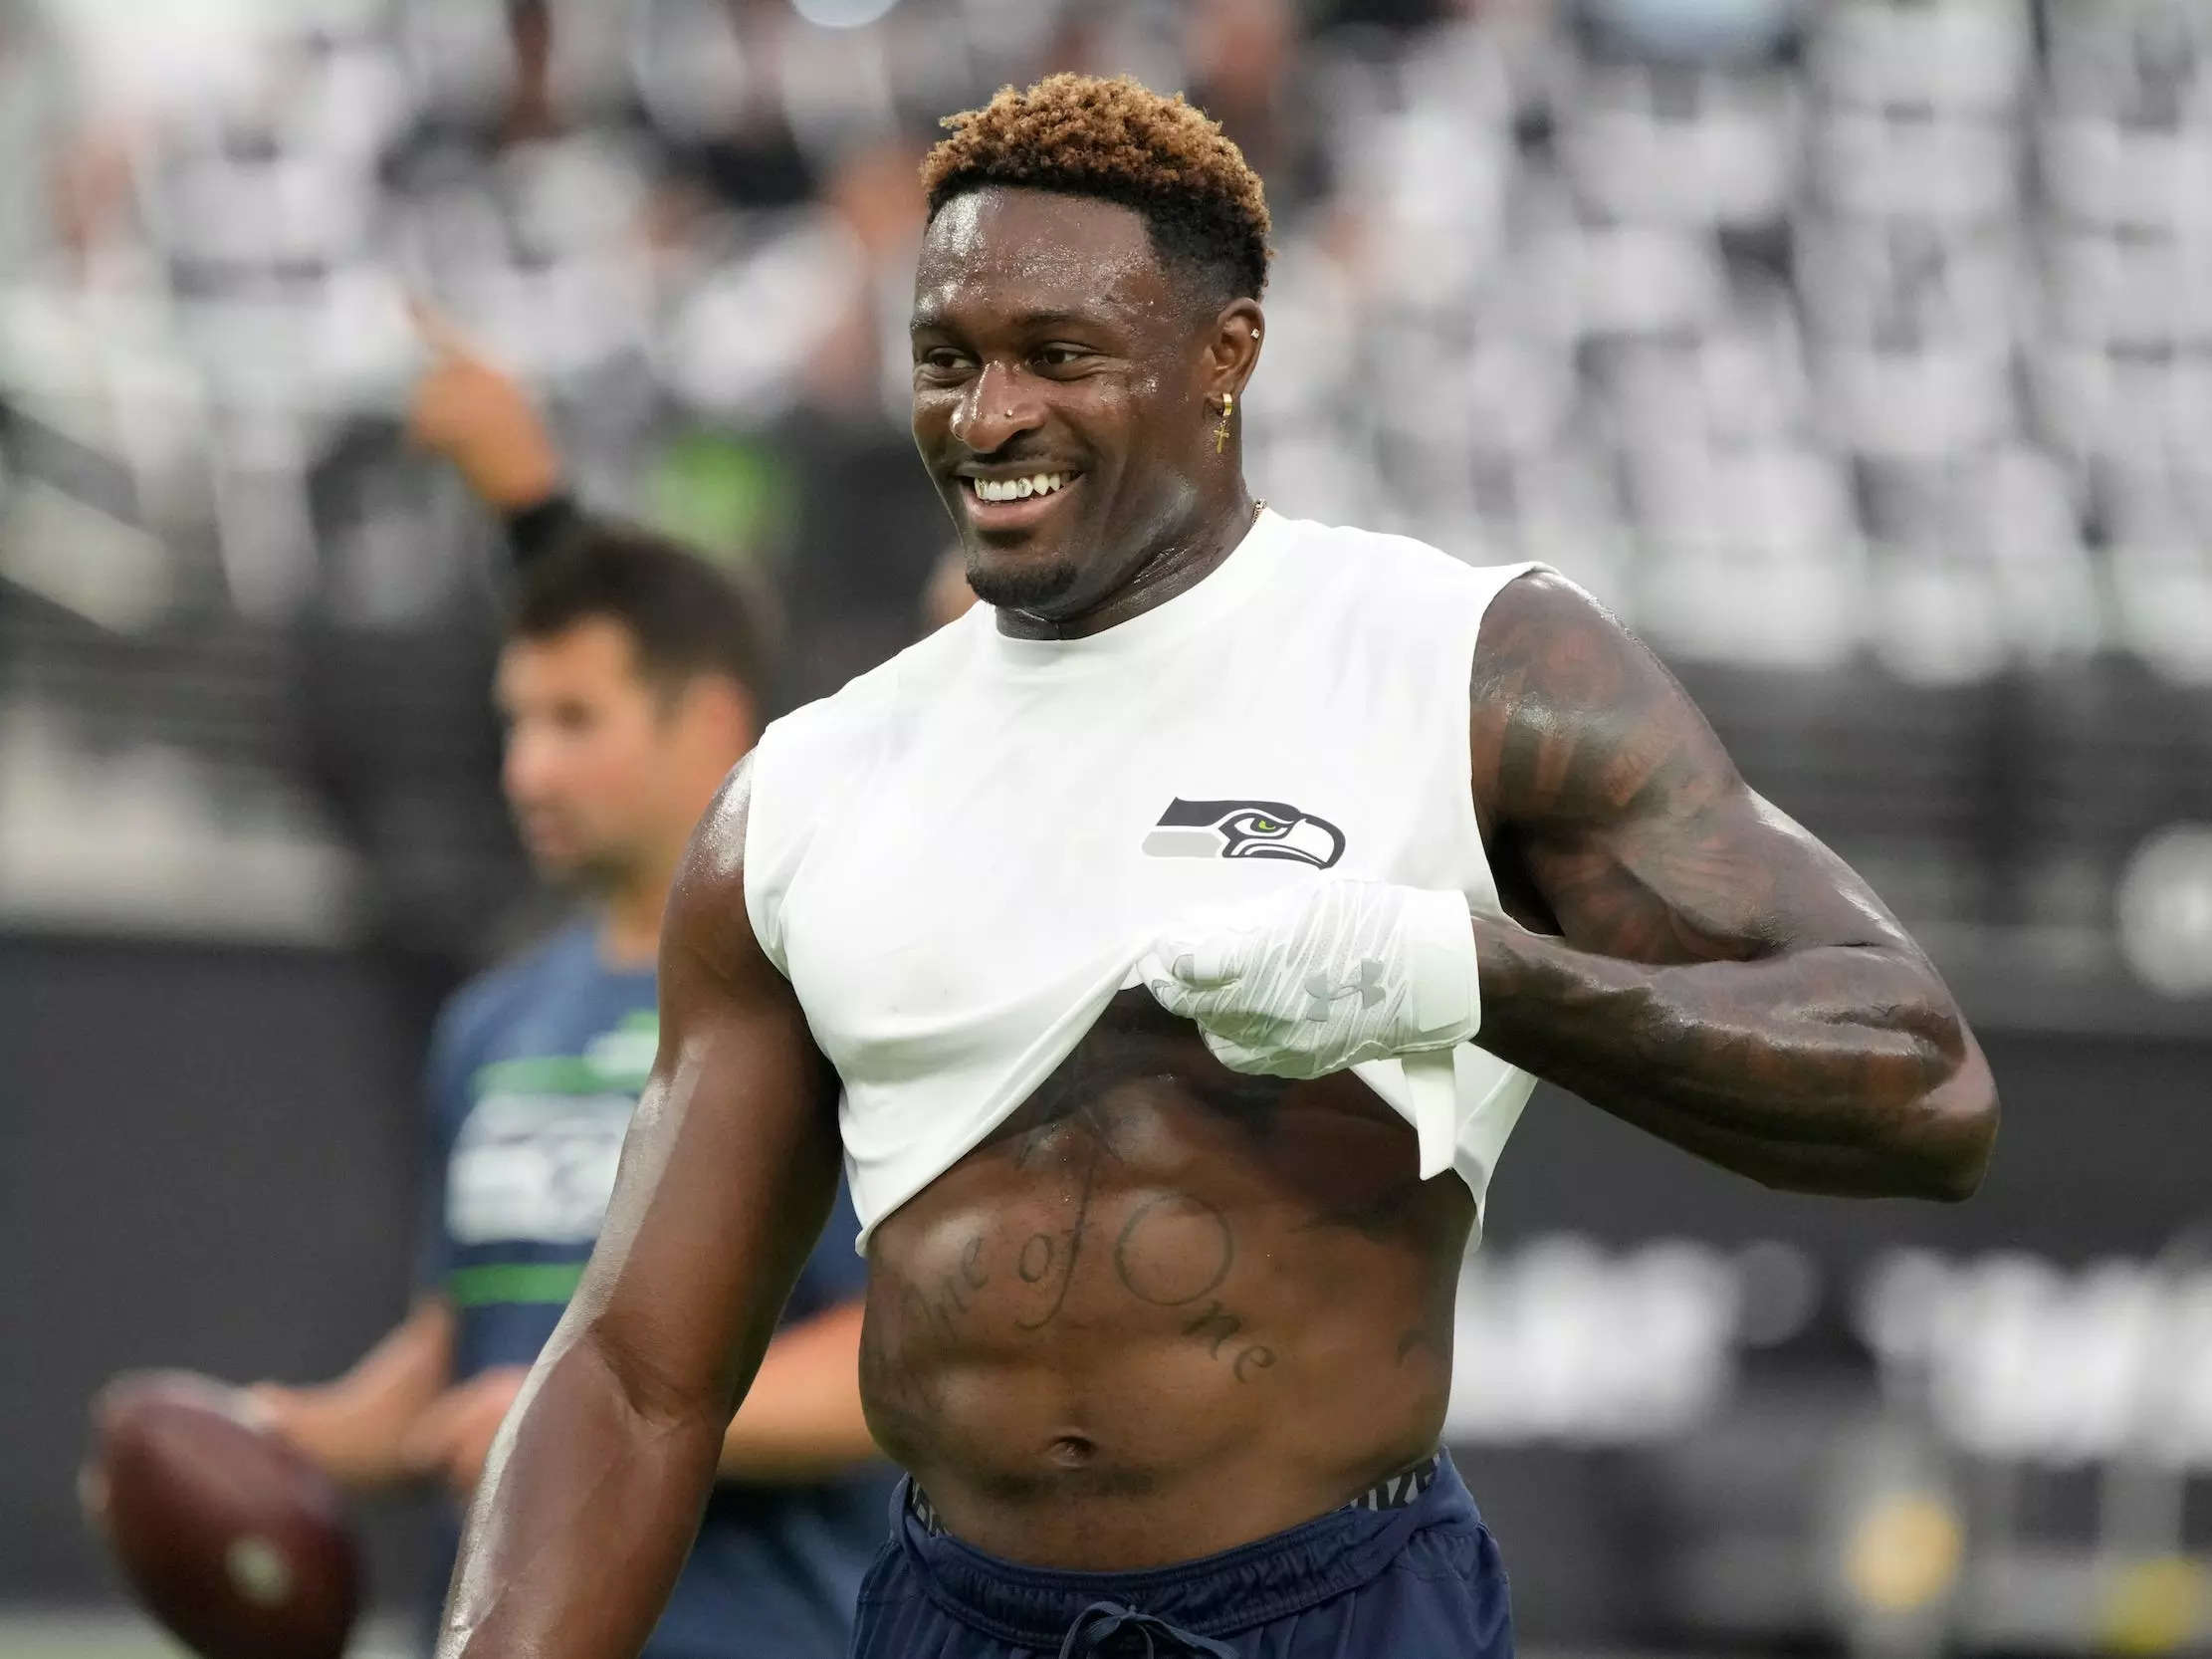 DK Metcalf's Simple Meal Plan: One Meal, One Coffee, and Candy